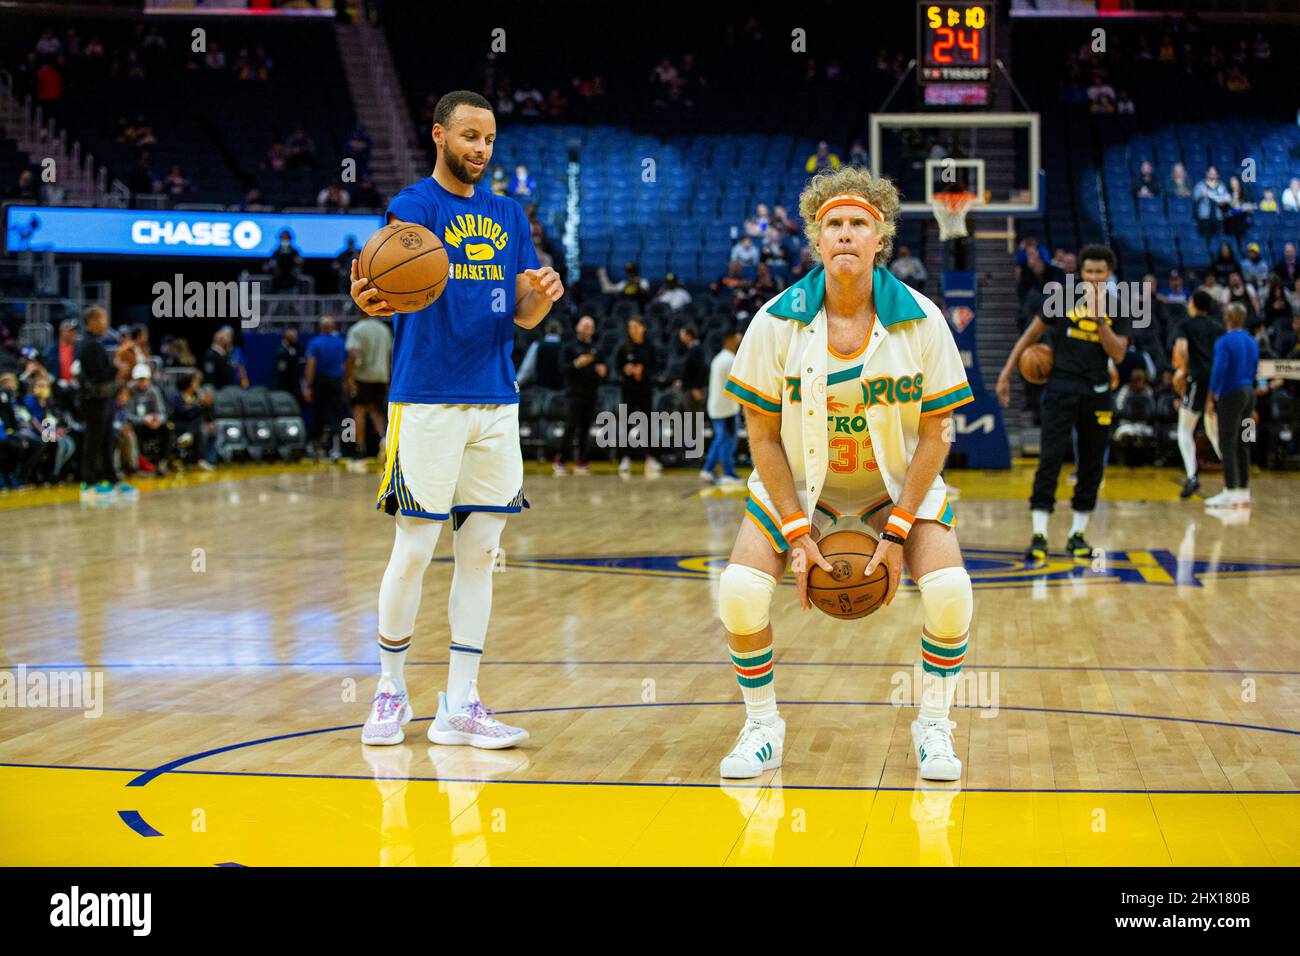 San Francisco, California. March 8, 2022, Golden State Warriors point guard Stephen Curry (30) and actor Will Ferrell warm-up practice during warm-ups before the team plays against the Los Angeles Clippers at Chase Center on March 8, 2022 in San Francisco, California. Credit: CV/ImageSpace/MediaPunch Stock Photo